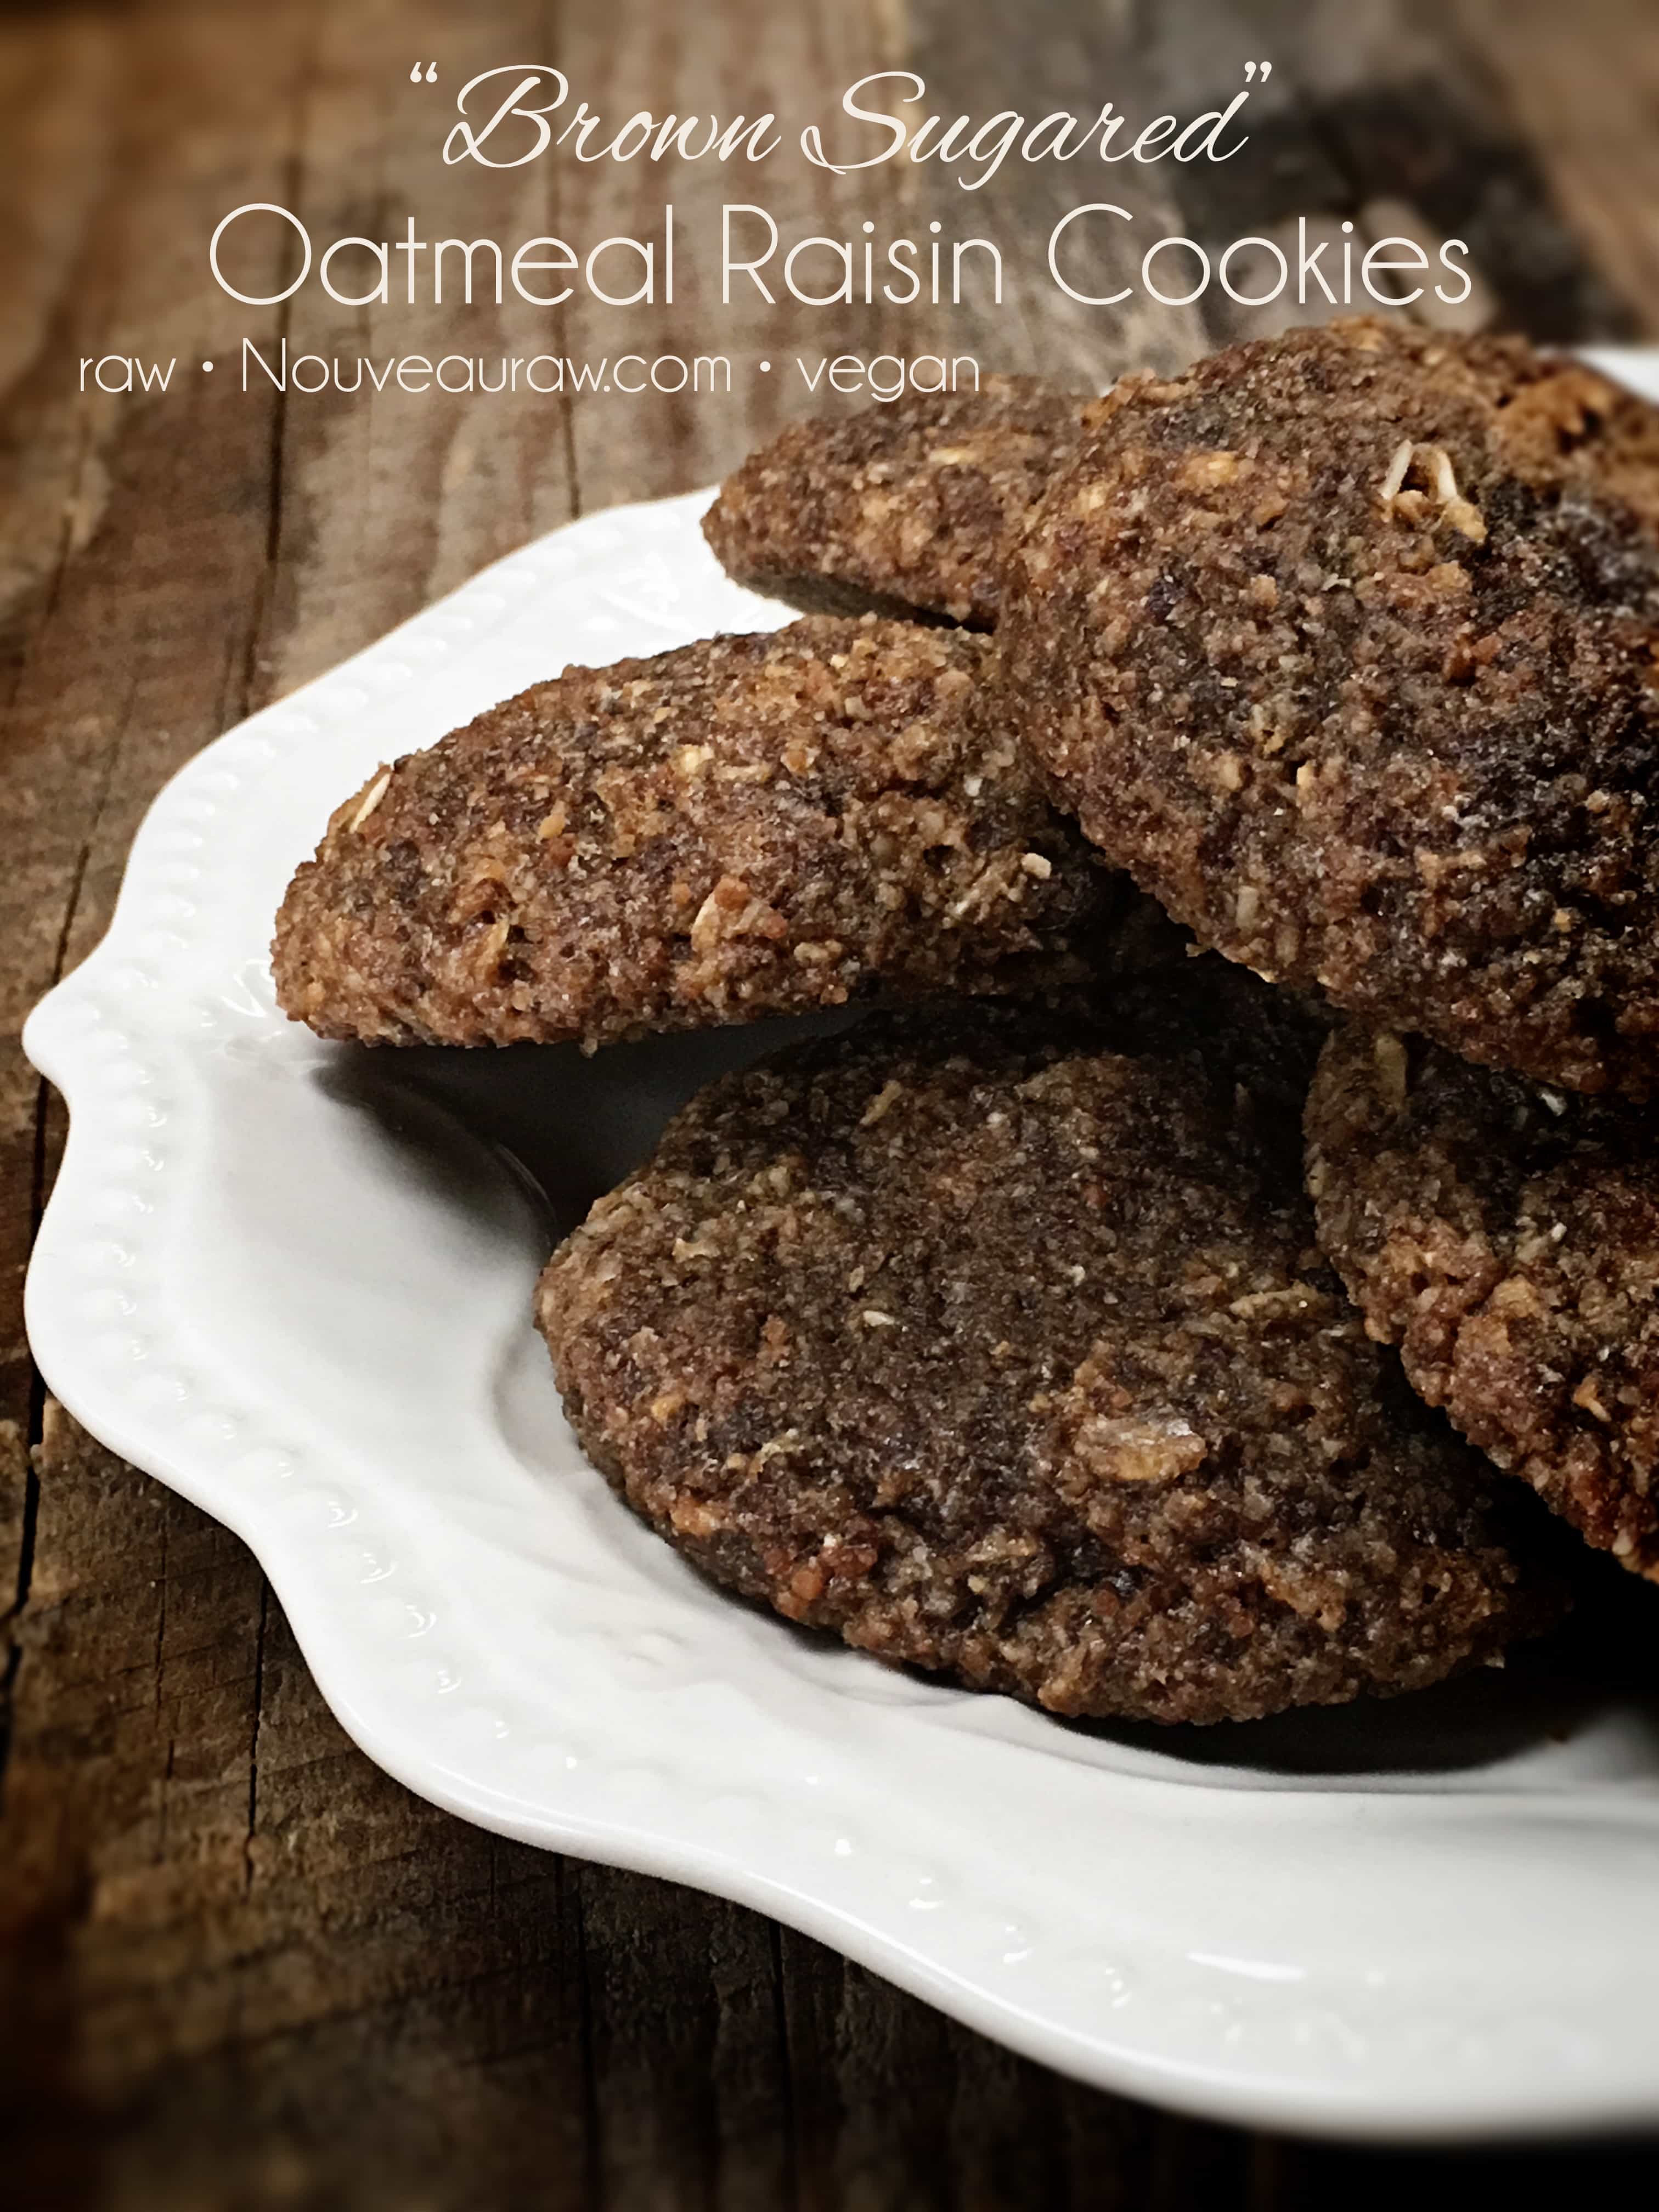 a close up of raw vegan Brown Sugared Oatmeal Raisin Cookies displayed on a wooden table